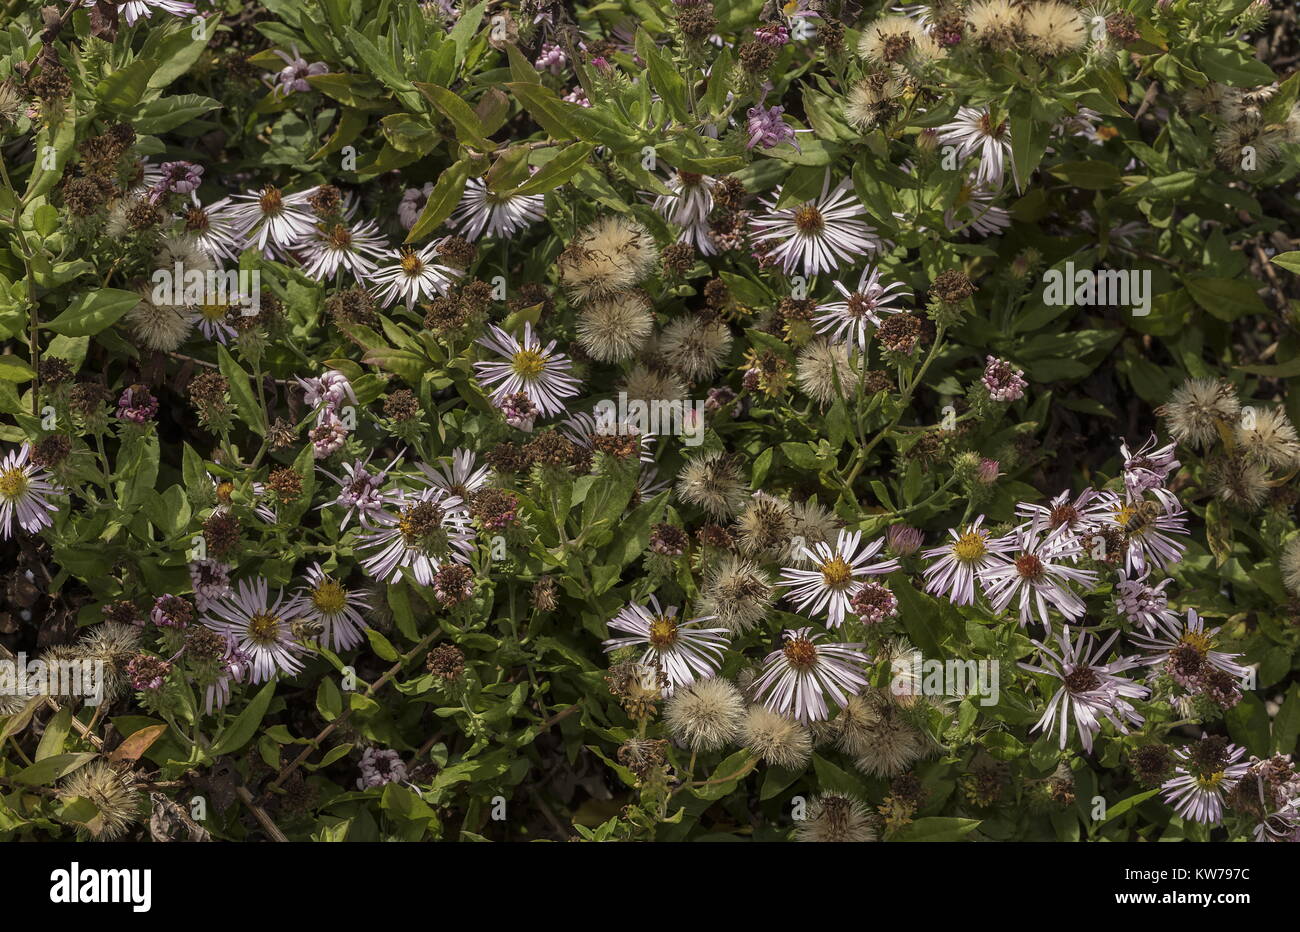 Climbing Aster, Symphyotrichum carolinianum, from eastern USA, widely planted in gardens. Stock Photo